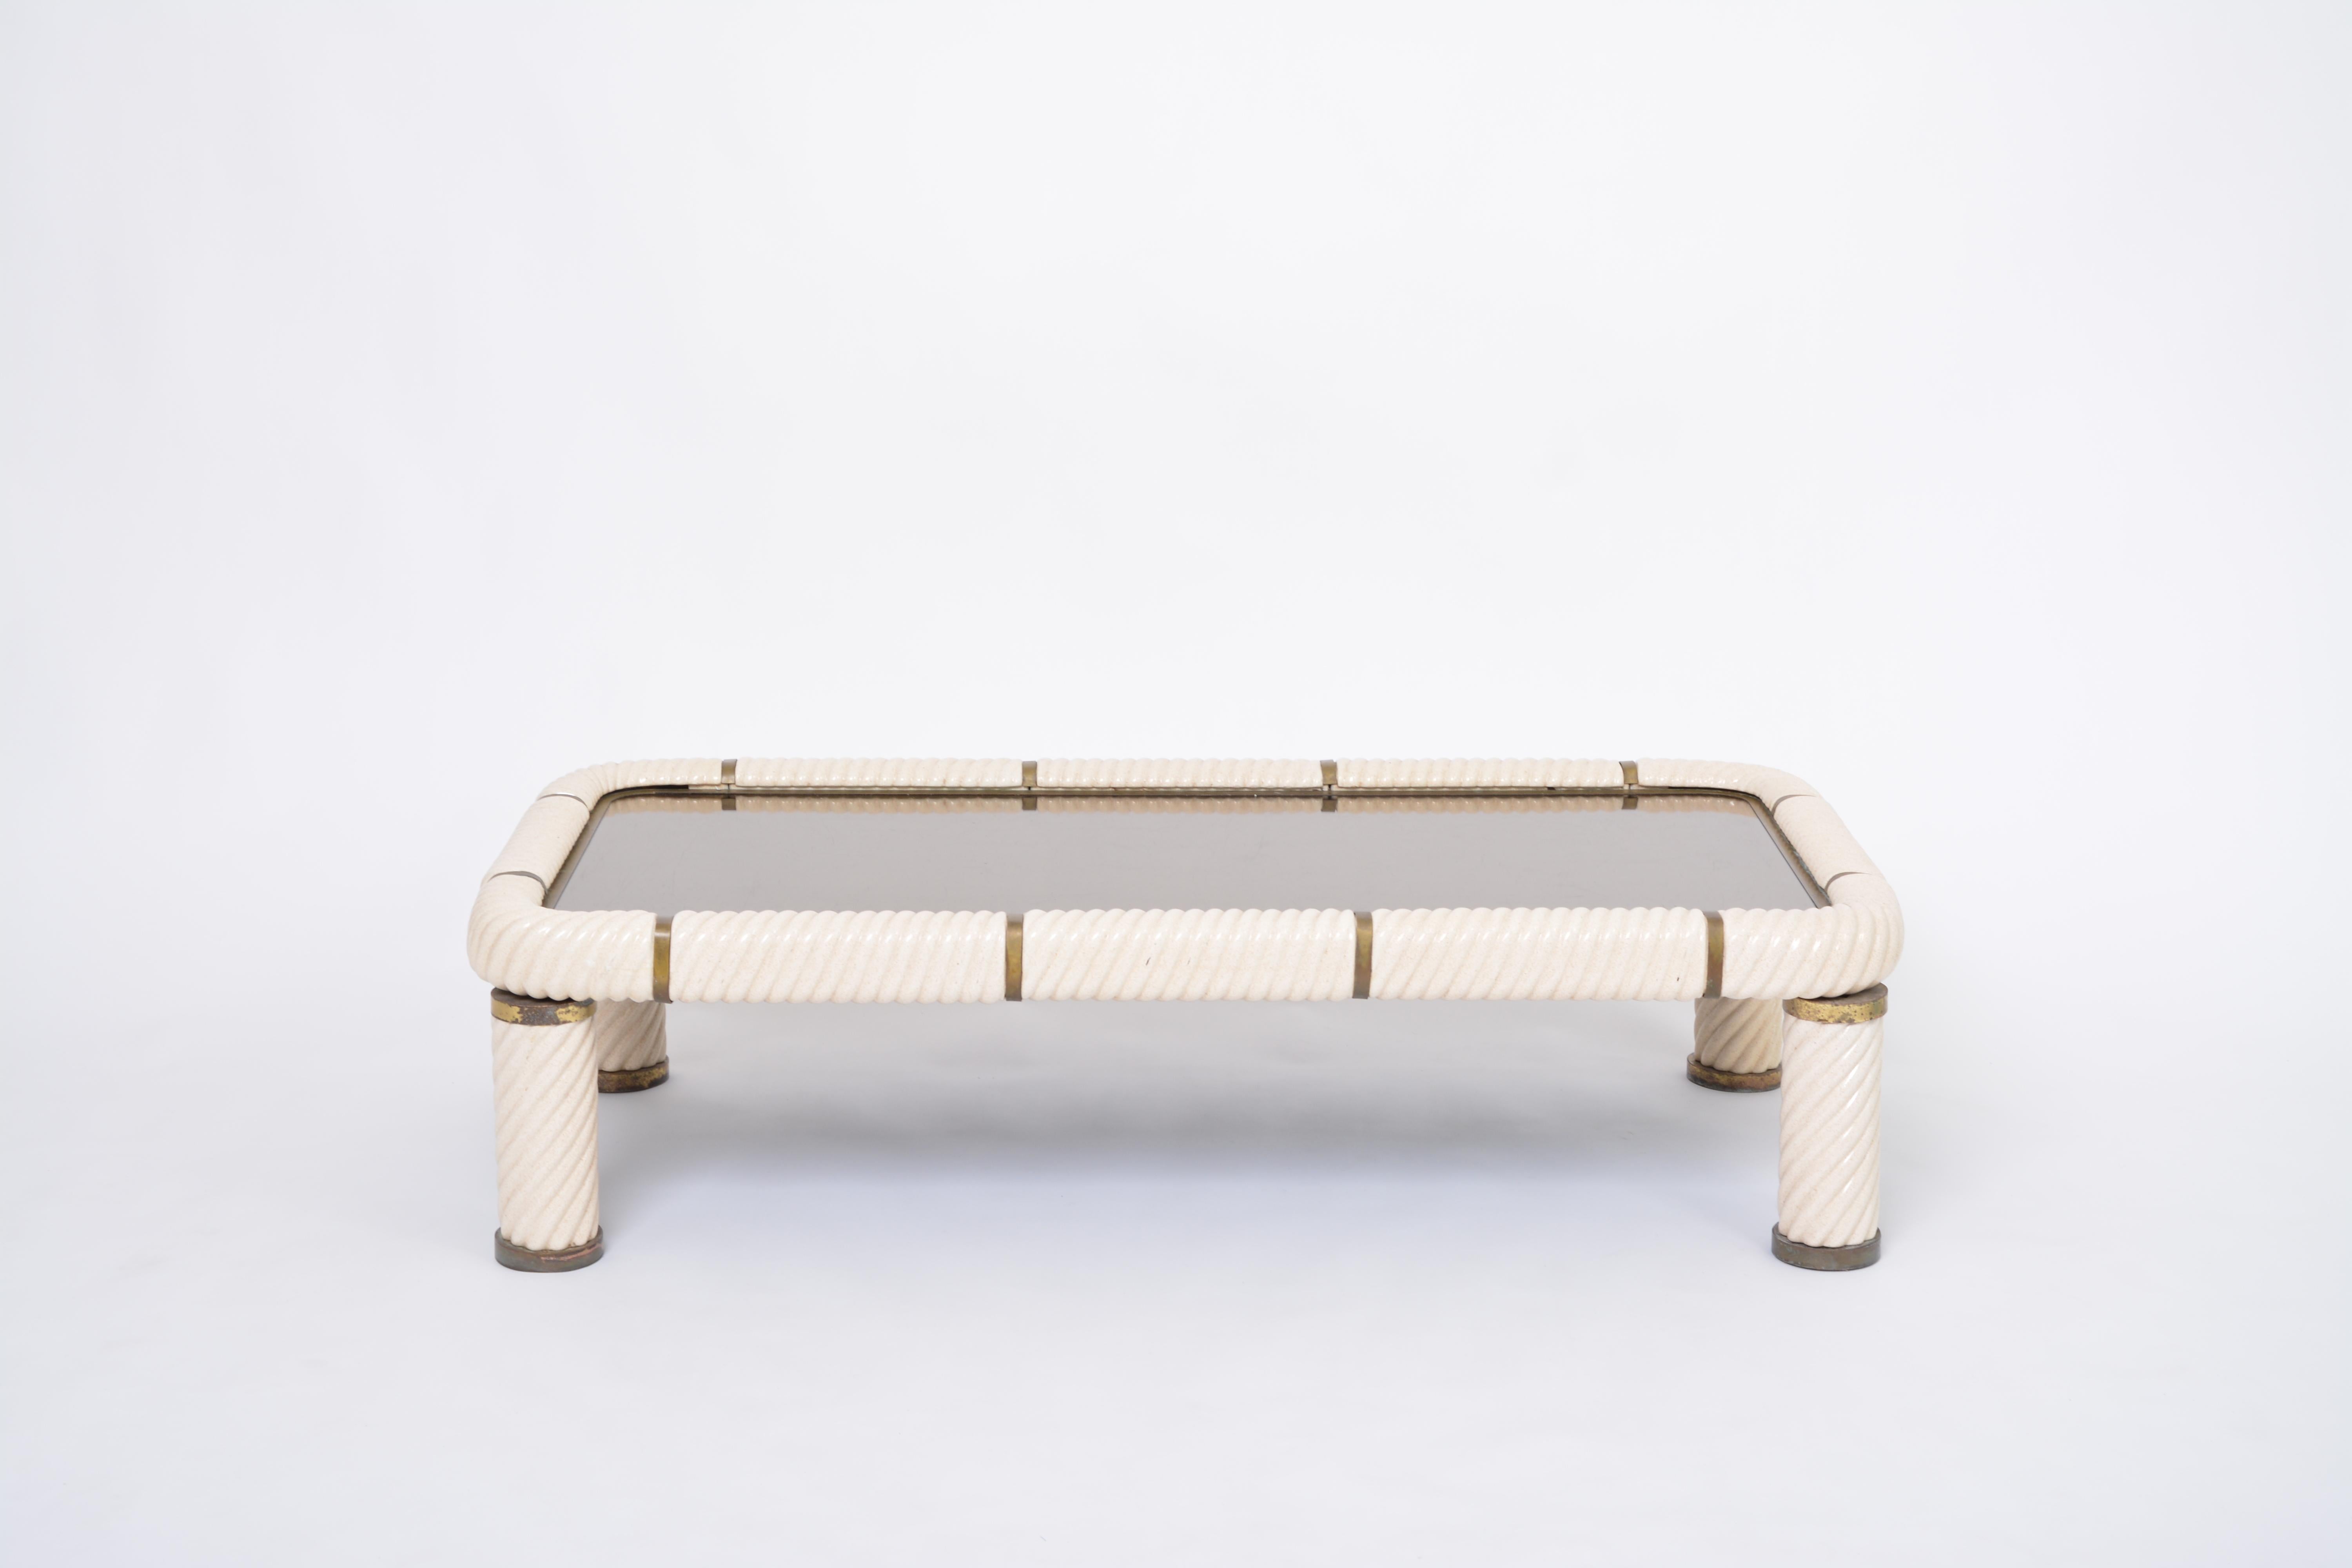 Large 1970s Tommaso Barbi white ceramic and brass coffee table
Stunning coffee table designed by Tommaso Barbi. This table features one of Barbi's signature techniques, which is porcelain in a spiral form to give this table it's absolute stunning